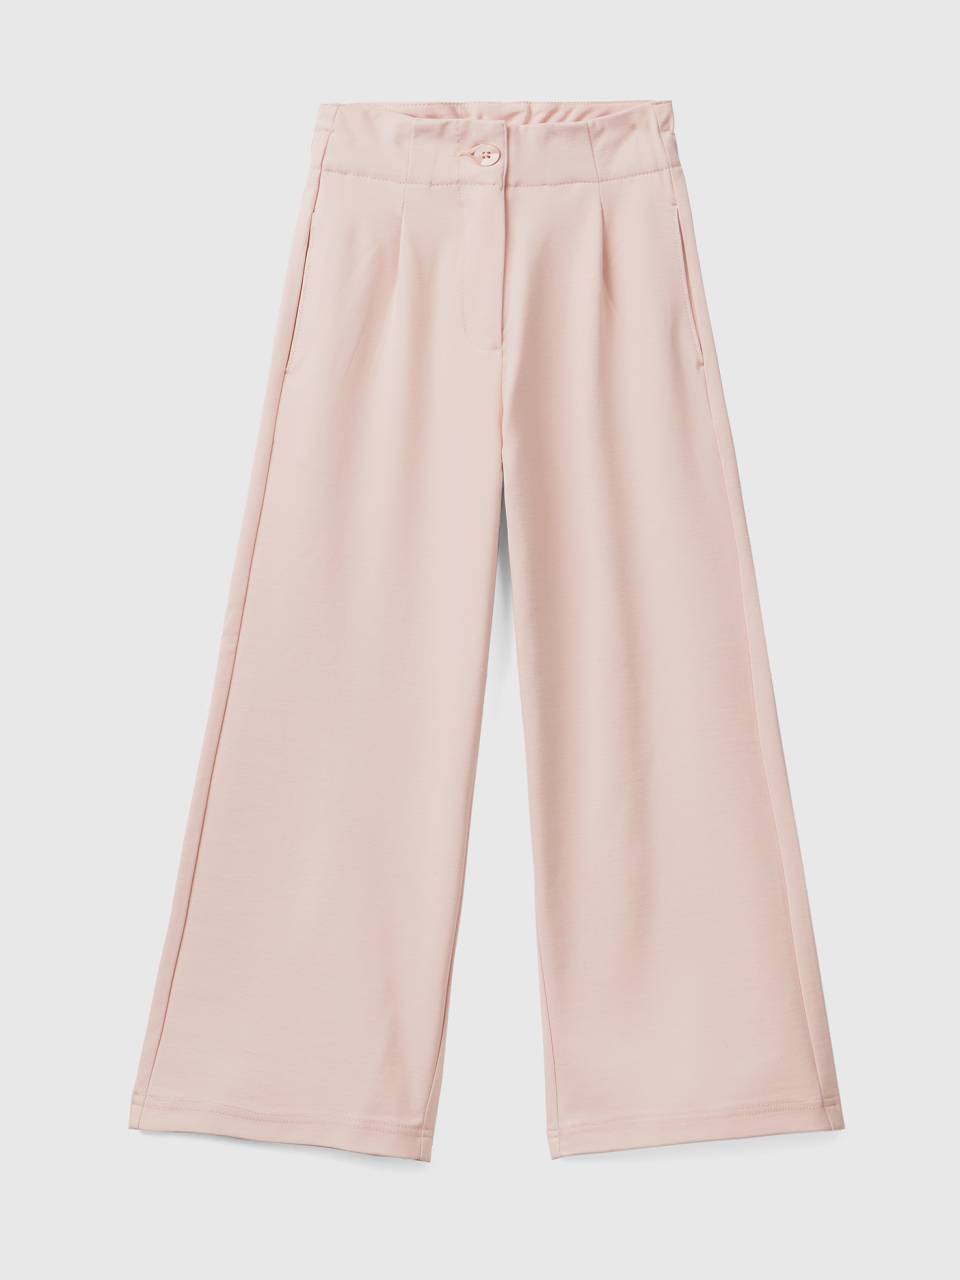 Benetton palazzo trousers with elastic at back. 1